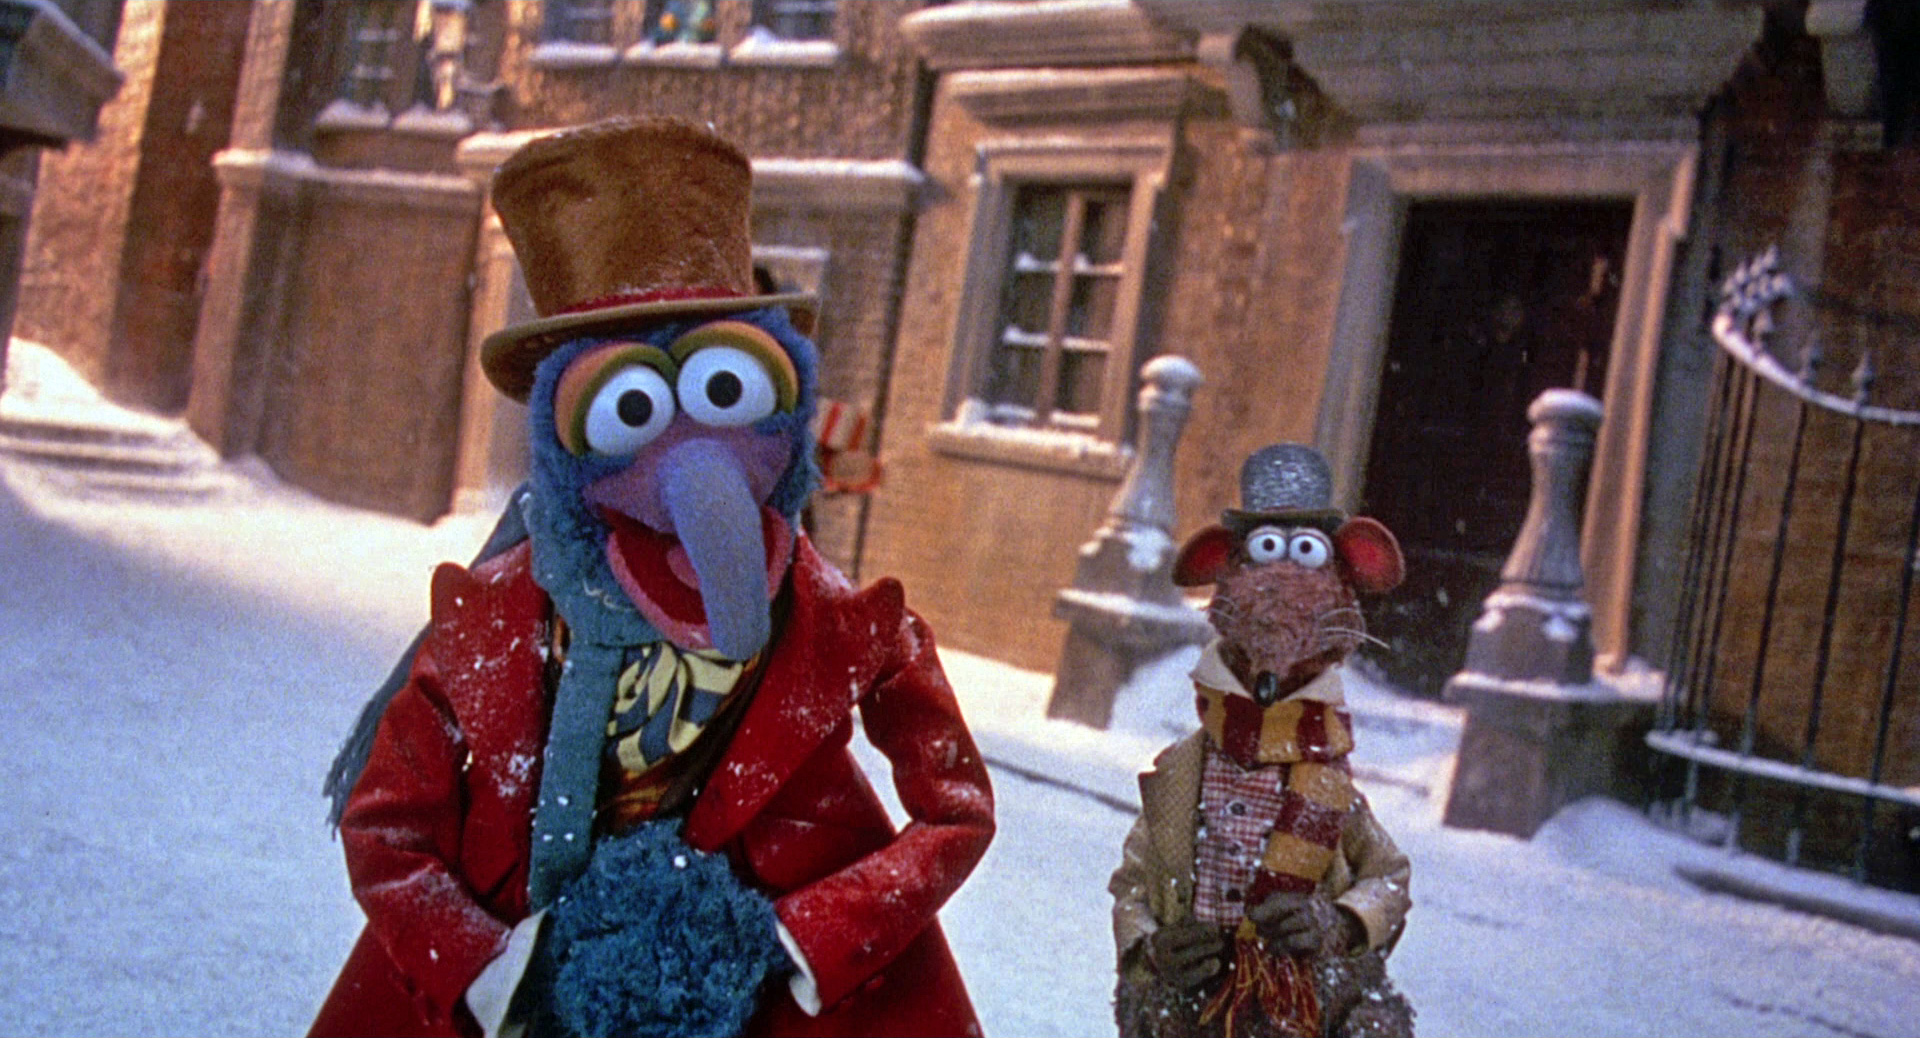 Gonzo and Rizzo walking in the snow in The Muppets Christmas Carol